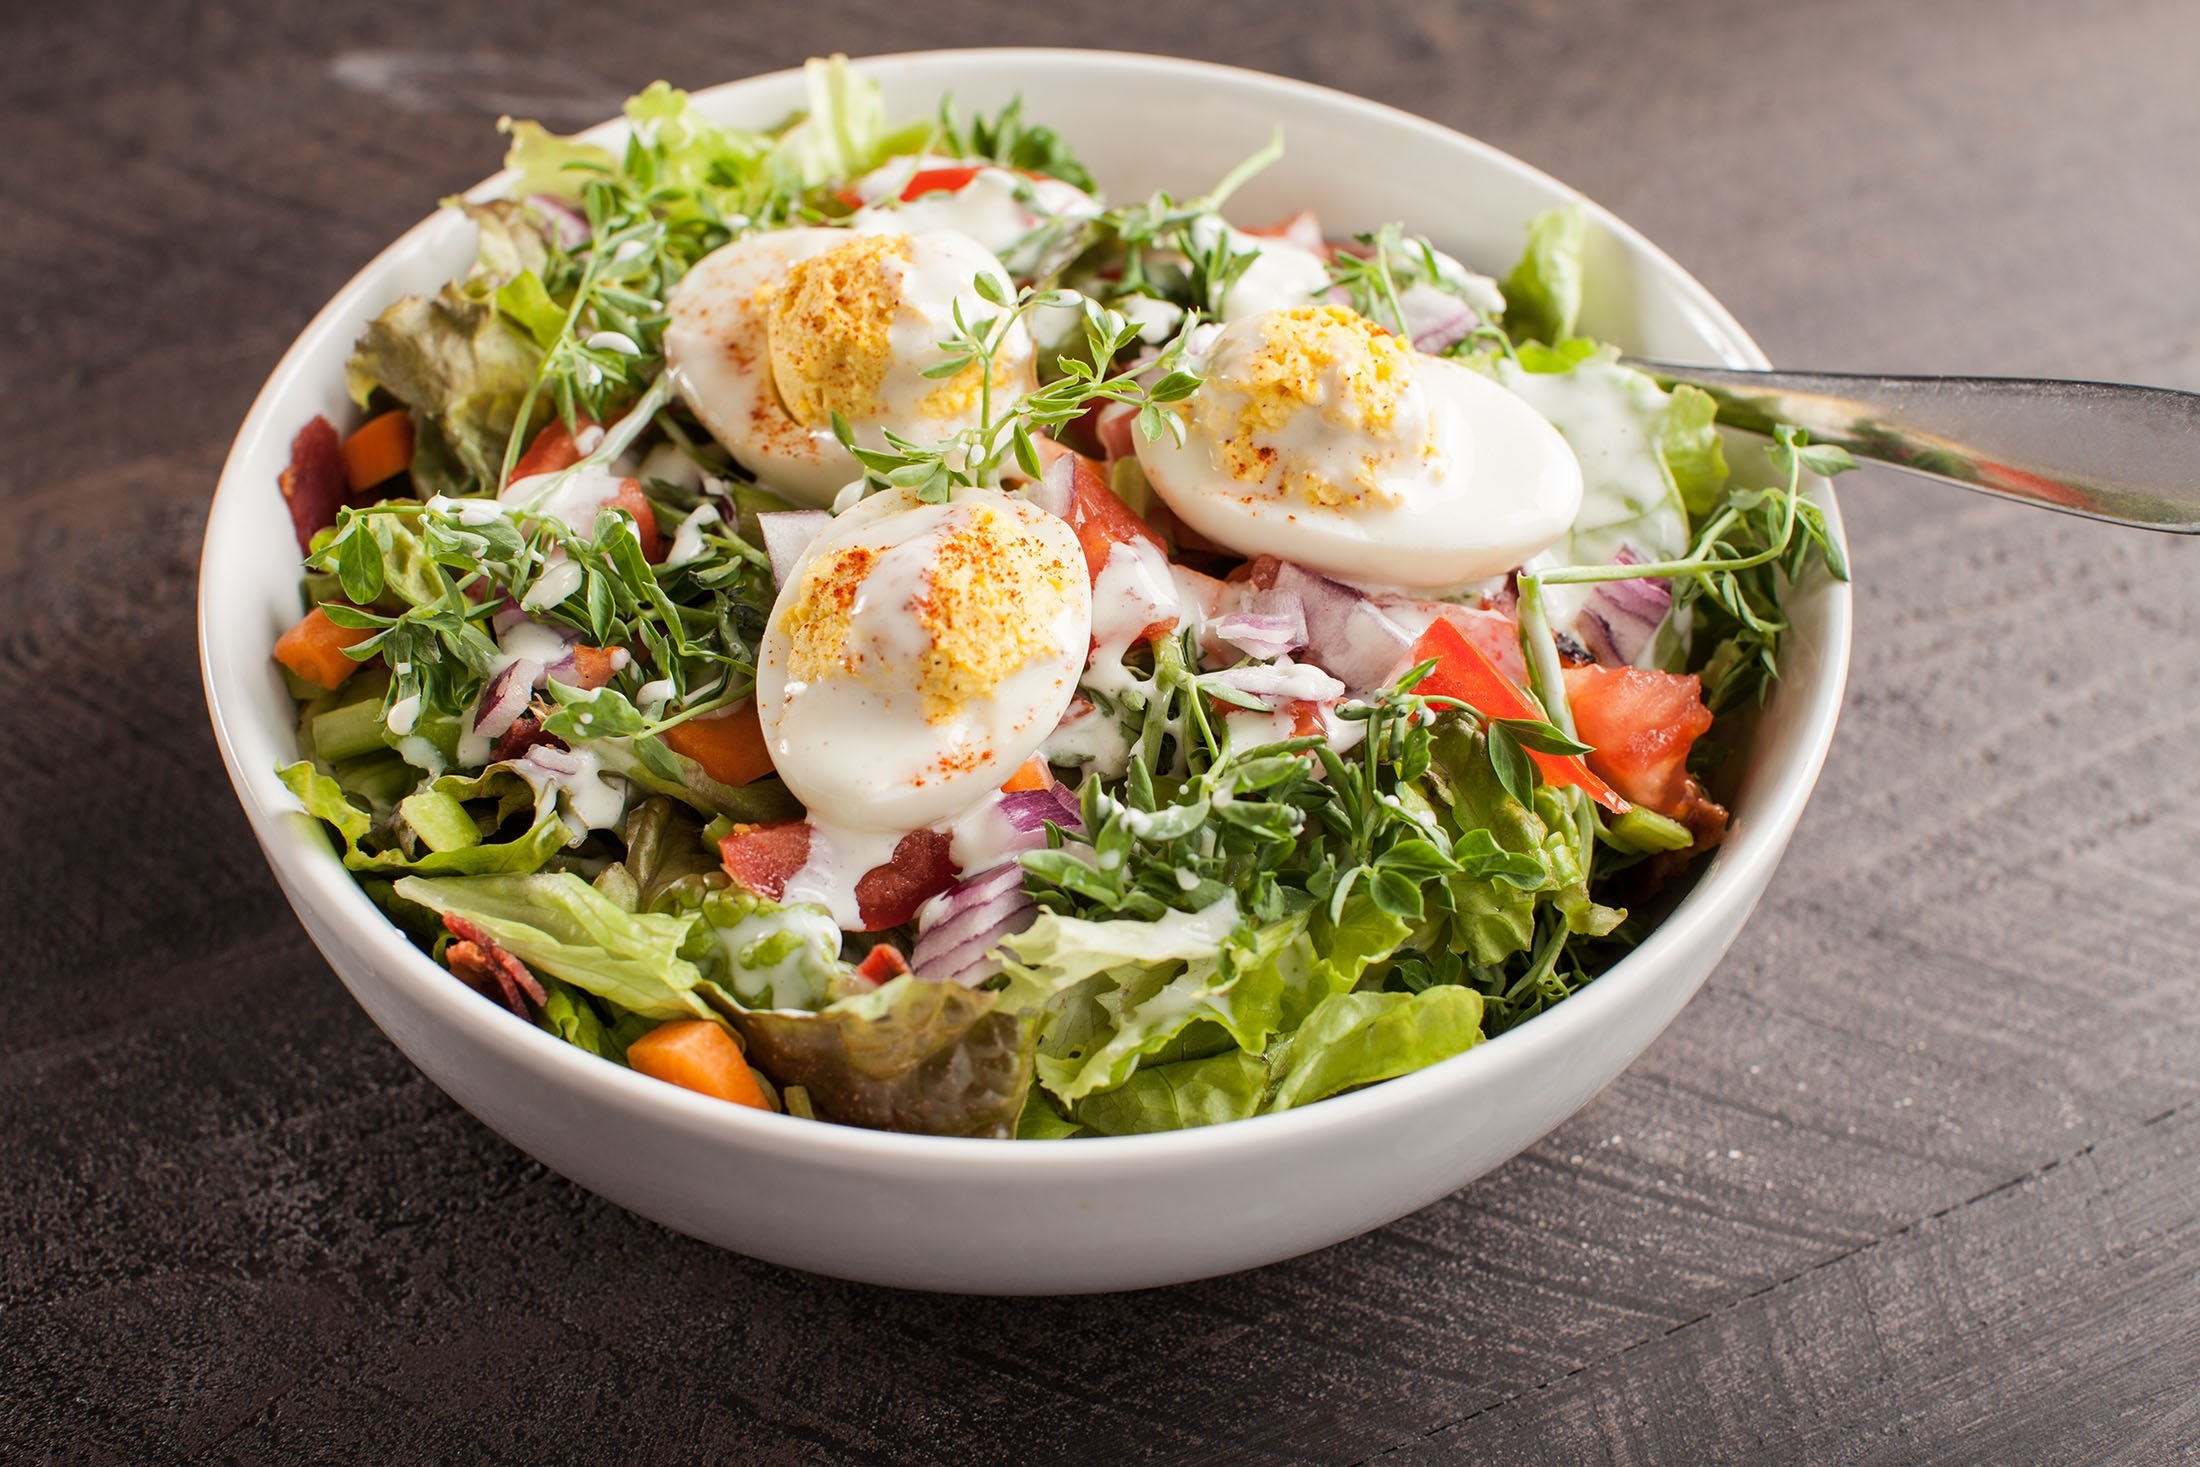 A large bowl of egg salad. (Shutterstock Photo)